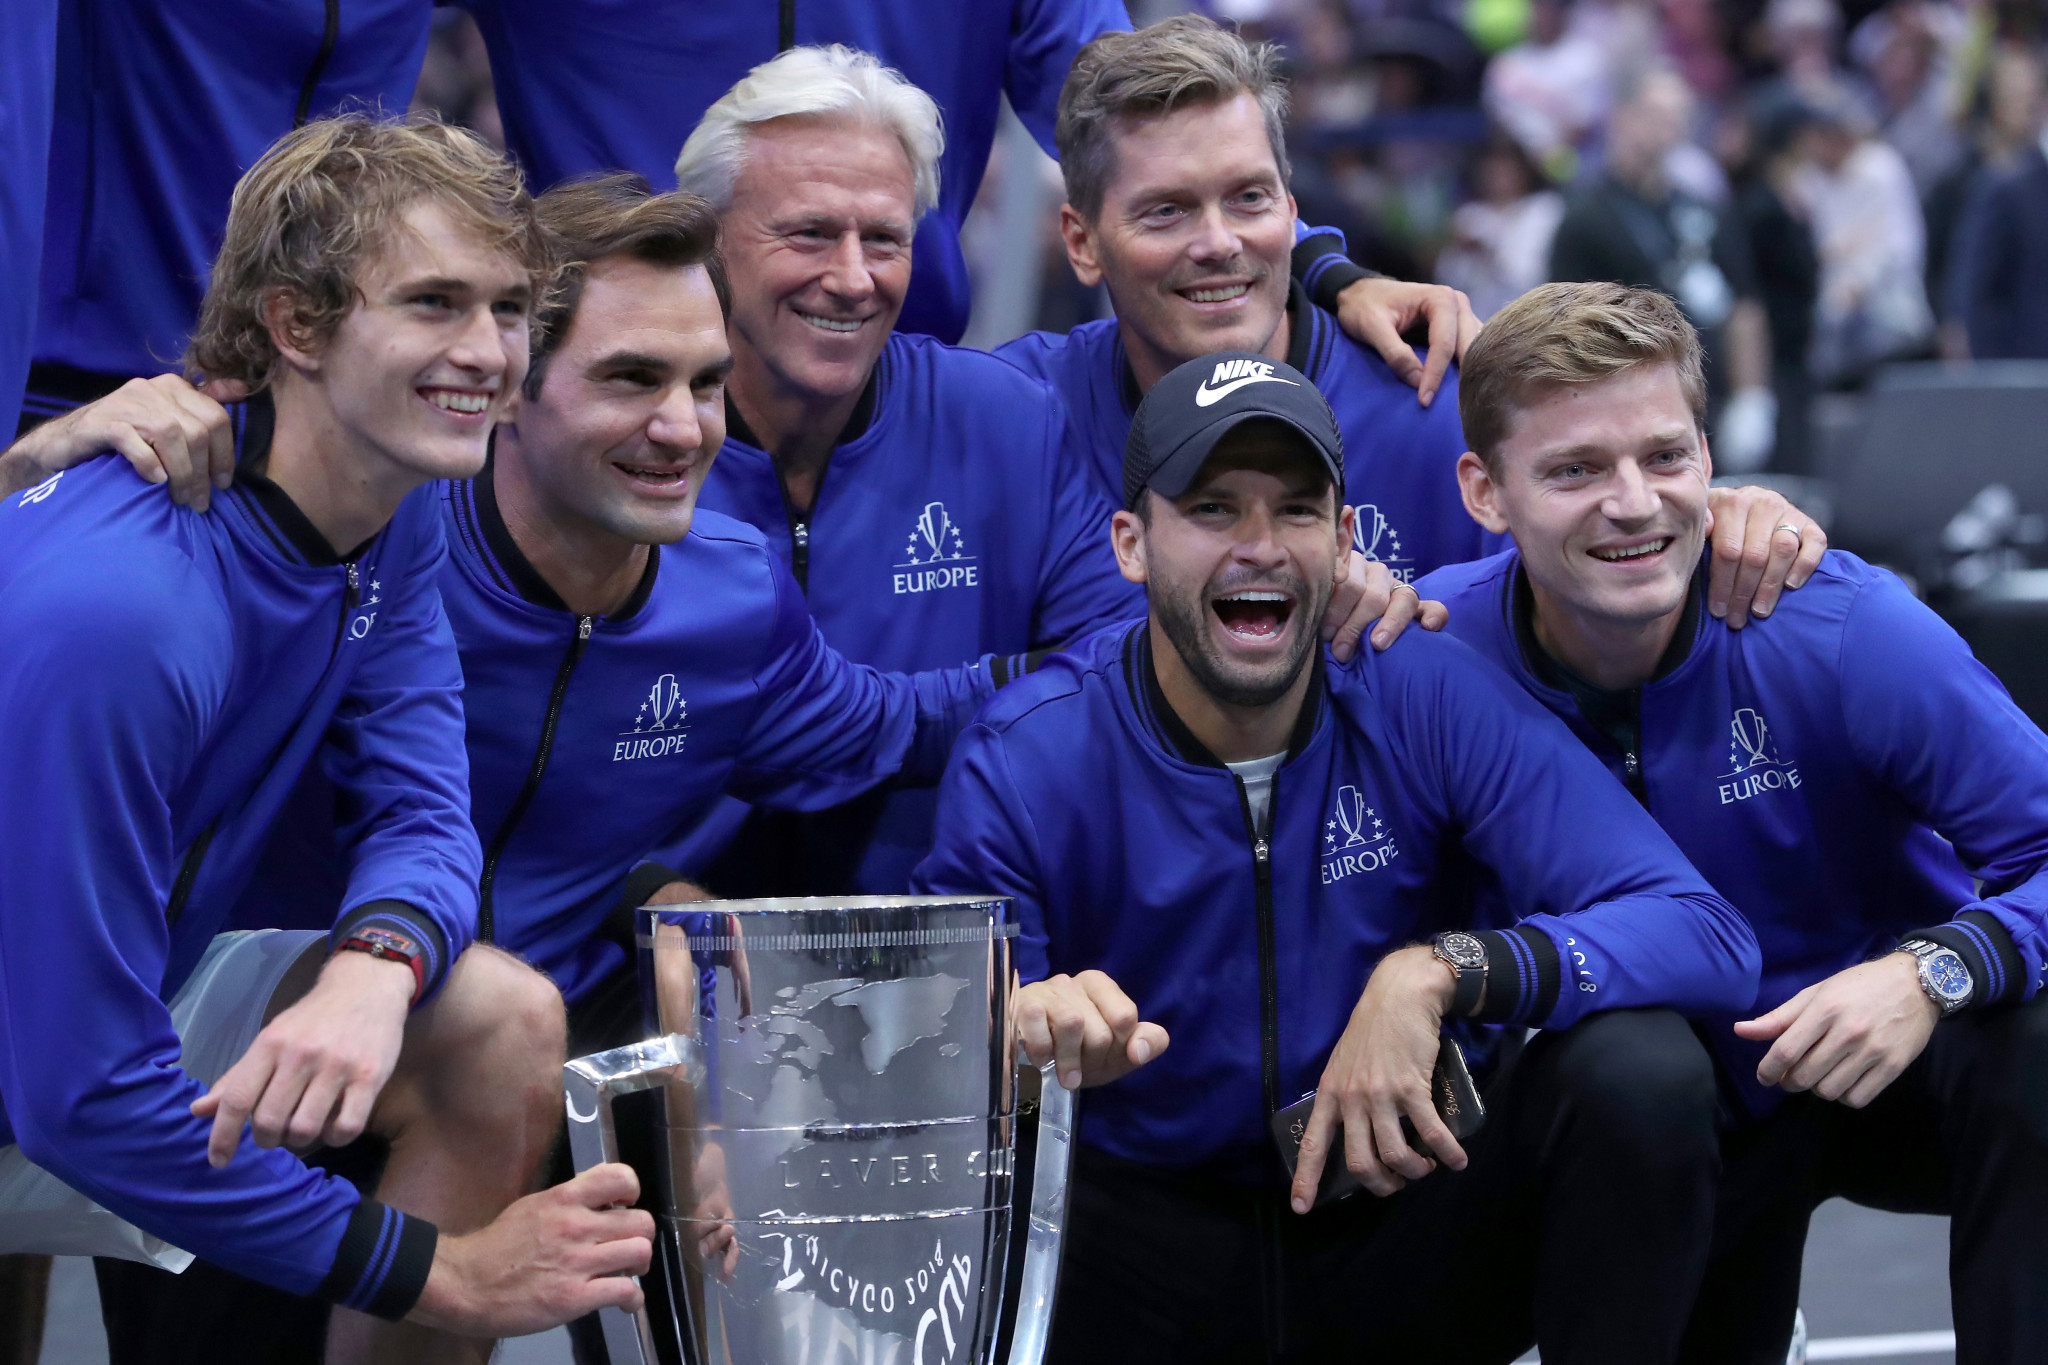 Team Europe have won the past two editions of the Laver Cup ©Getty Images